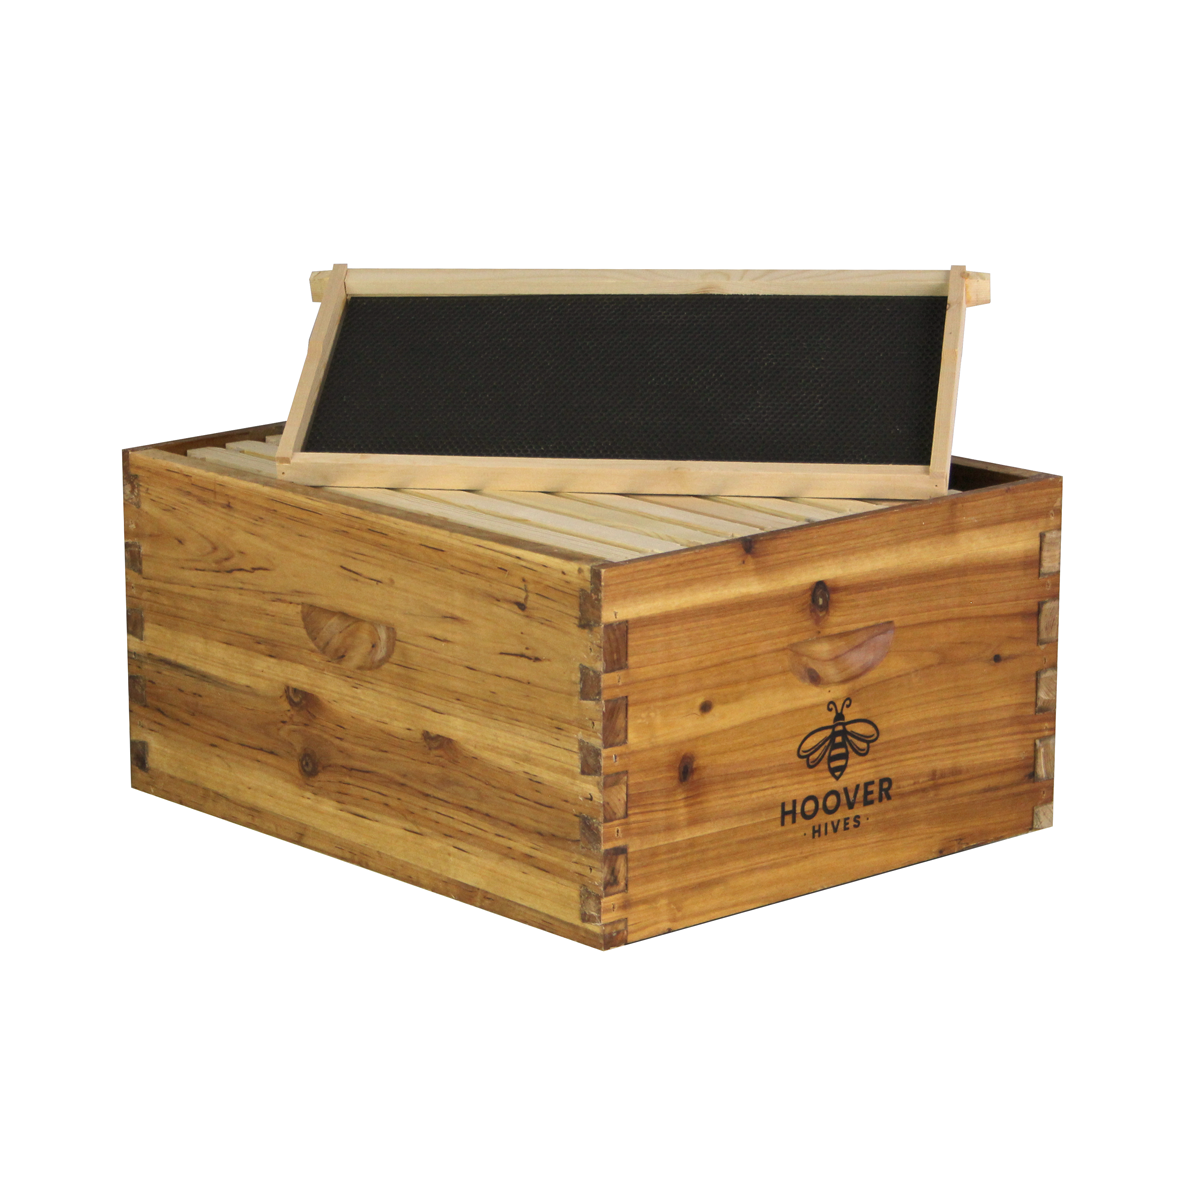 Hoover Hives Wax Coated 10 Frame Deep Brood Box With Frames & Foundations